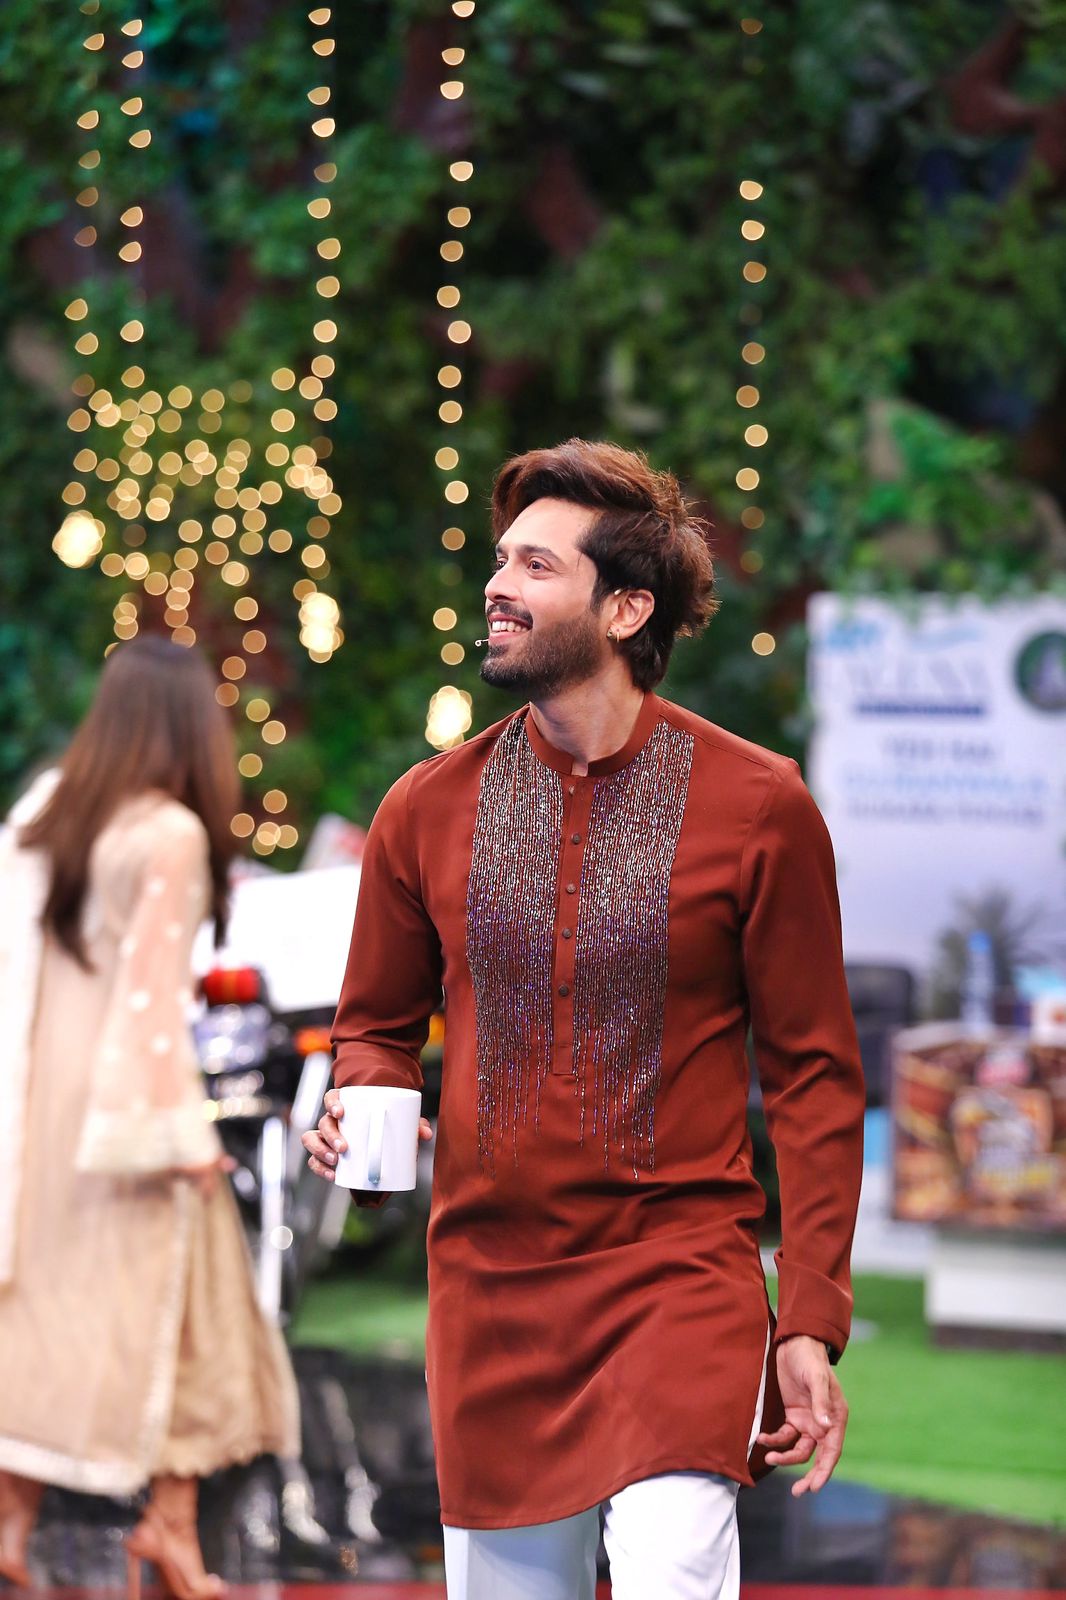 Snug's Tobacco Brown Hand-Embroidered Kurta Trouser Set: As Worn by Fahad Mustafa - Elevate Your Style.